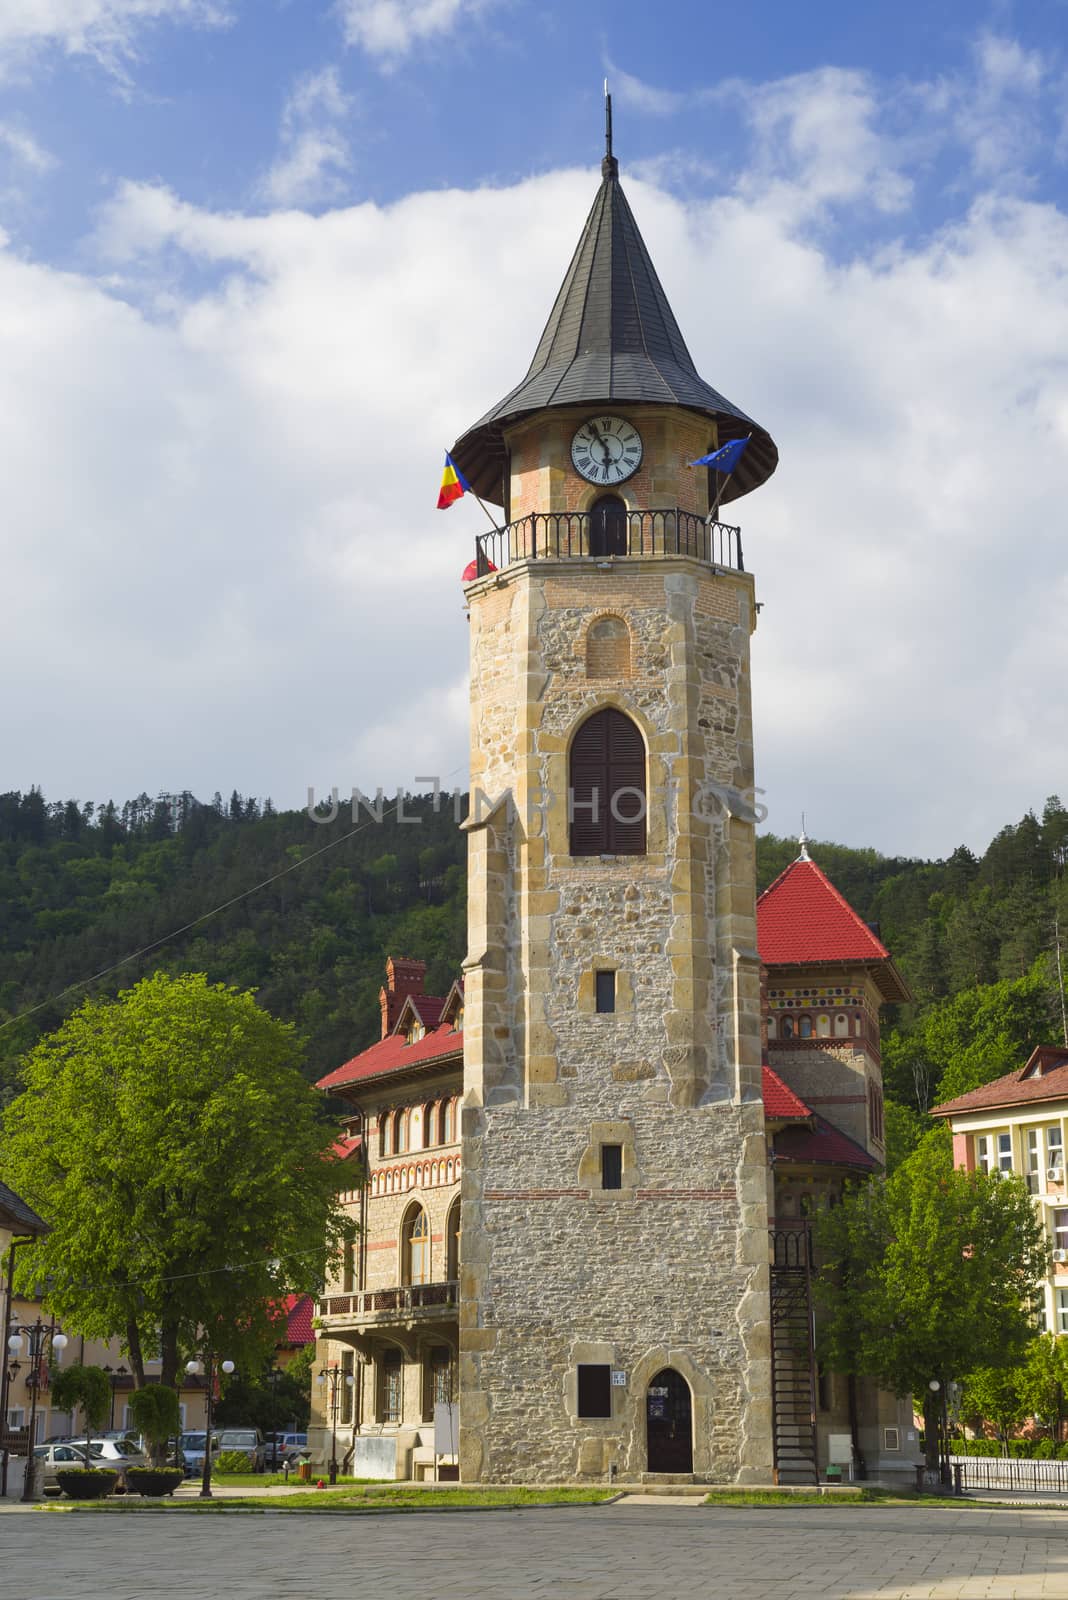 Historic monument, medieval stone tower by savcoco